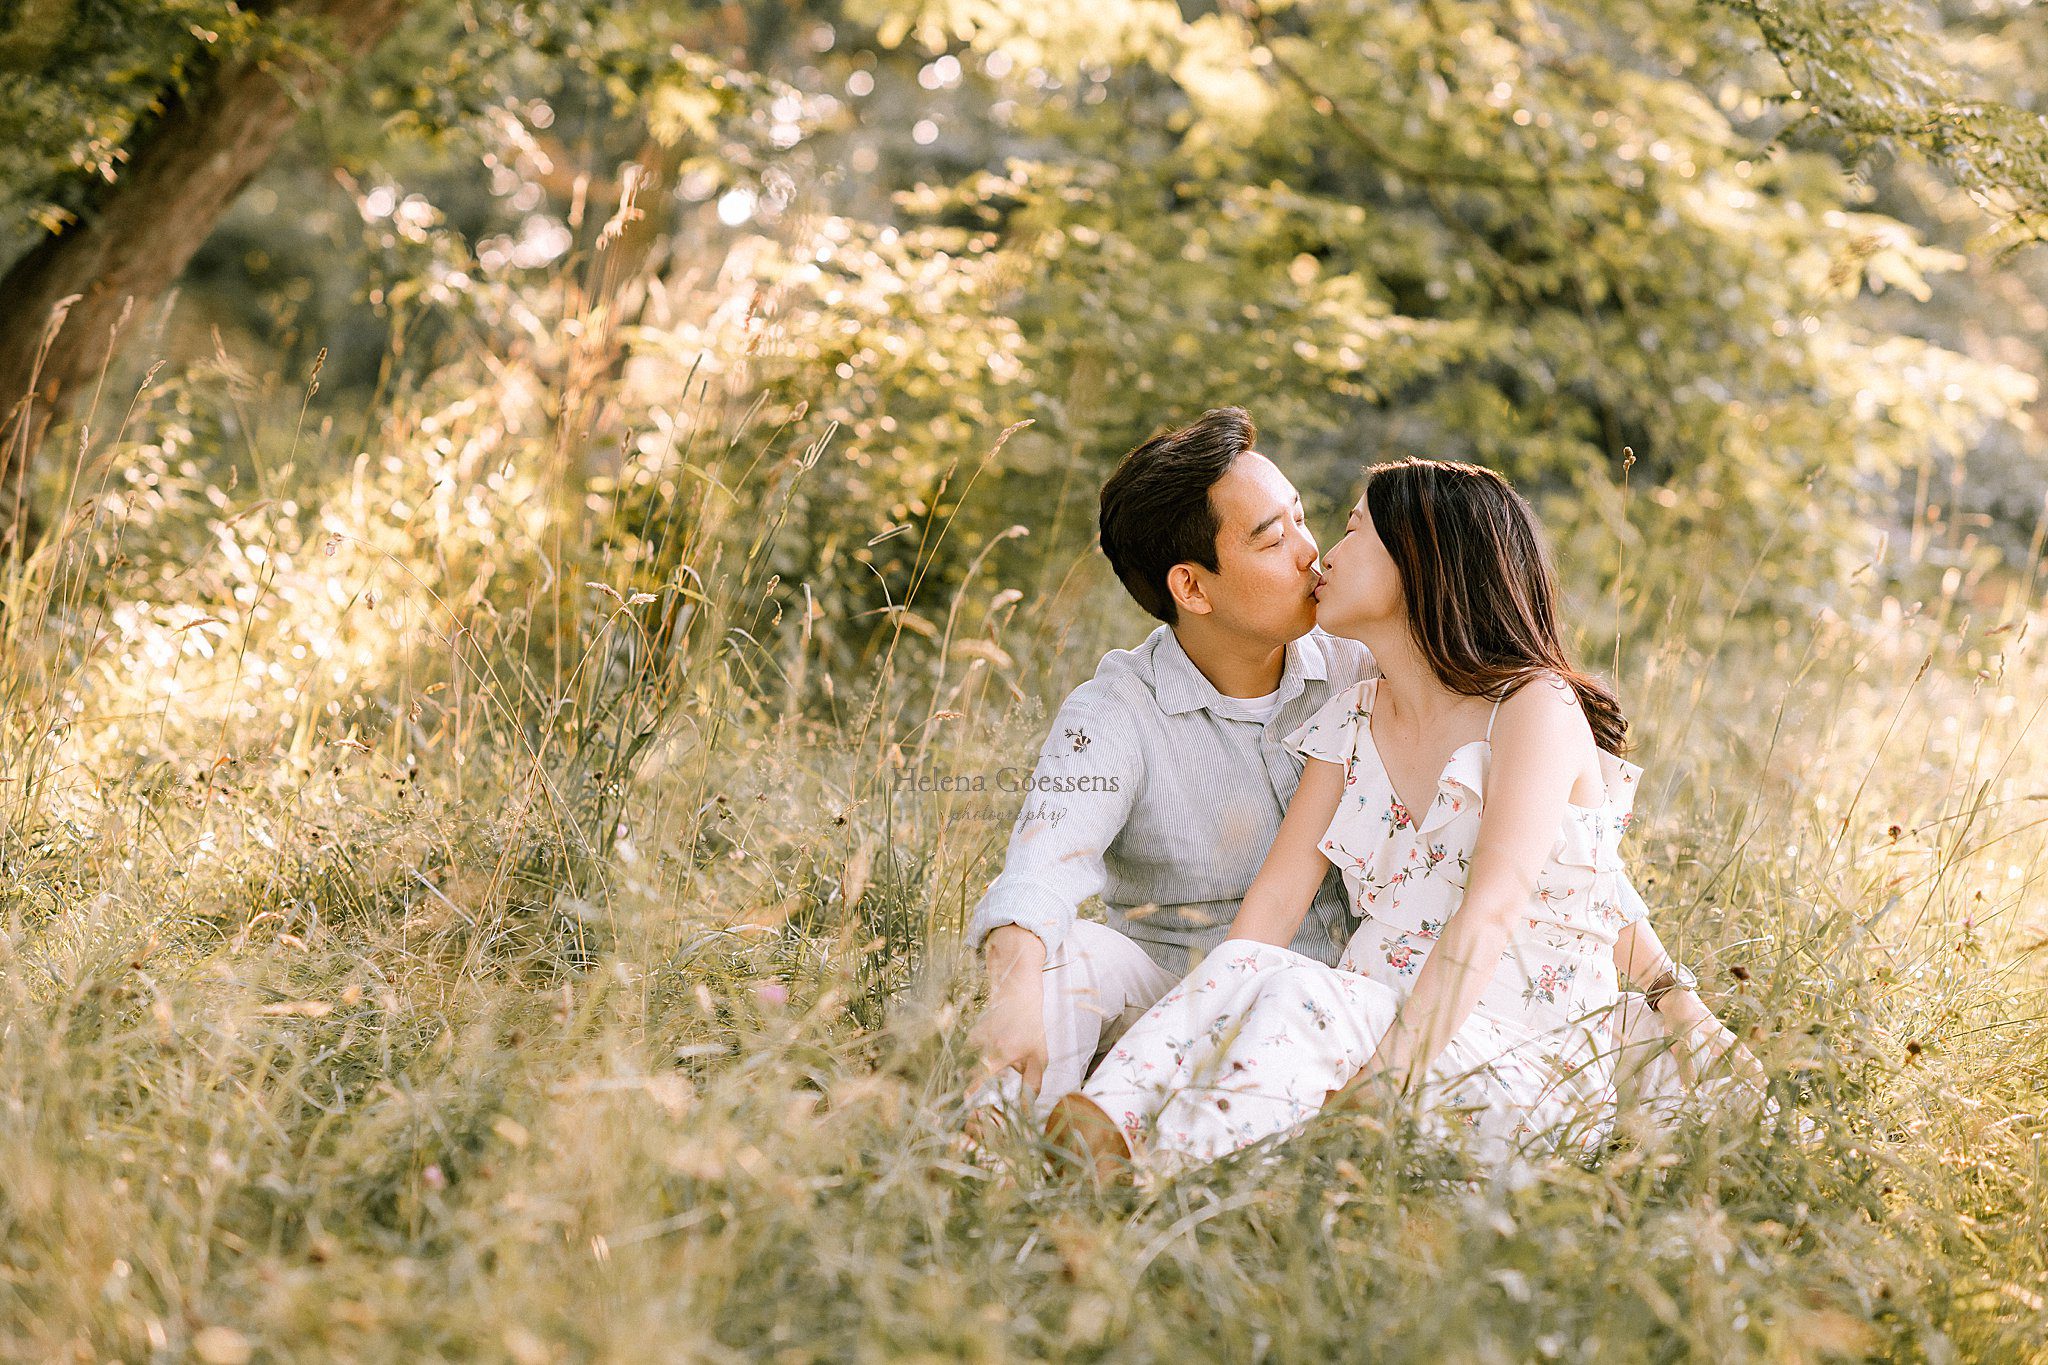 expectant parents kiss in field of Arnold's Arboretum during maternity session with Helena Goessens Photography